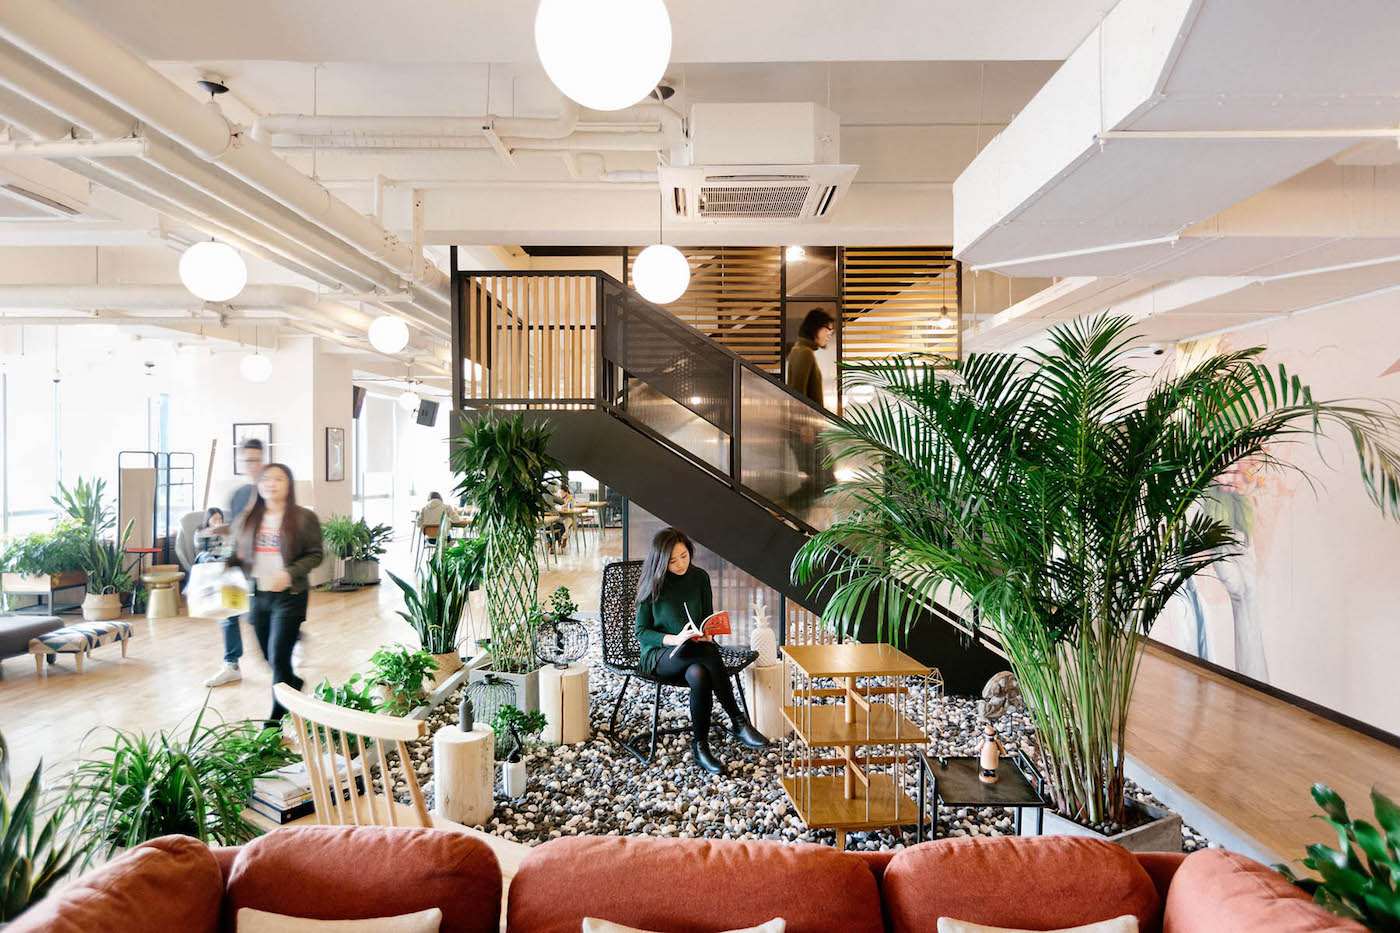 WeWork Ciyunsi in Beijing, China. Photograph by The We Company